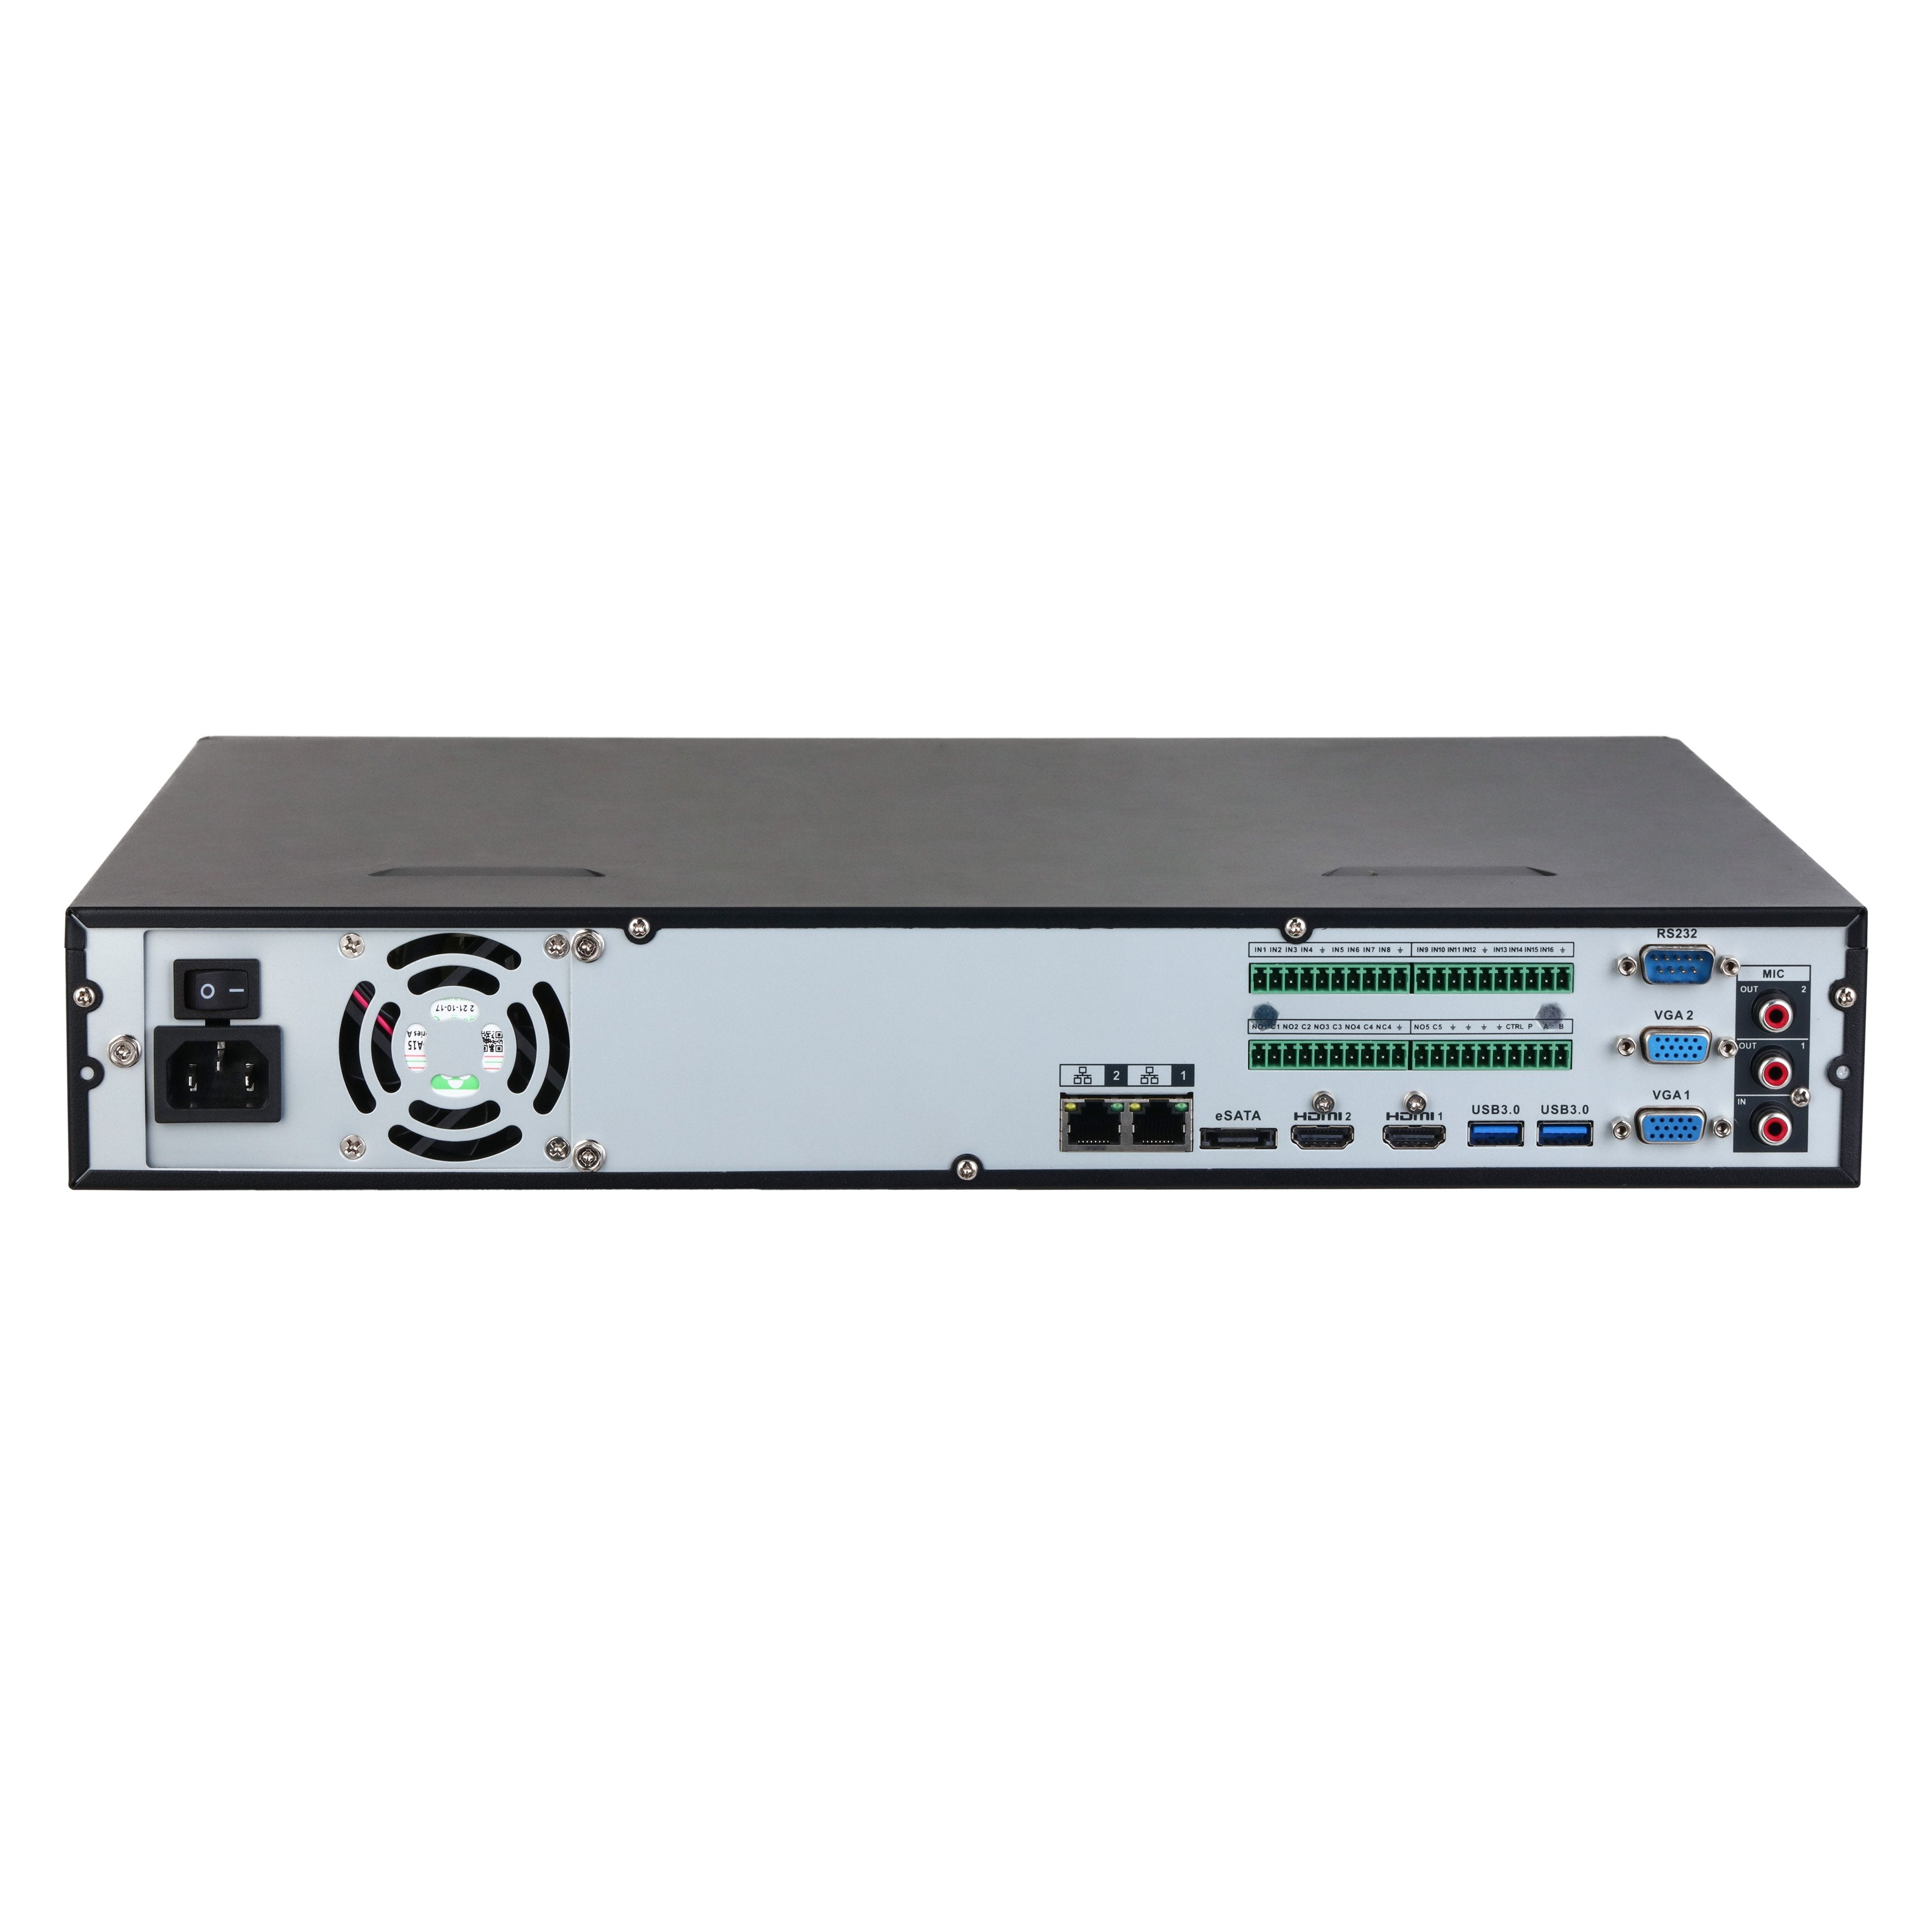 Dahua 32 Channel NVR, WizSense AI Series, 1.5RU, 384MB (200MB With AI Function Enabled), 2 x Gigabit NIC, 4 x HDD **NO POE PORTS OR HDD INSTALLED**